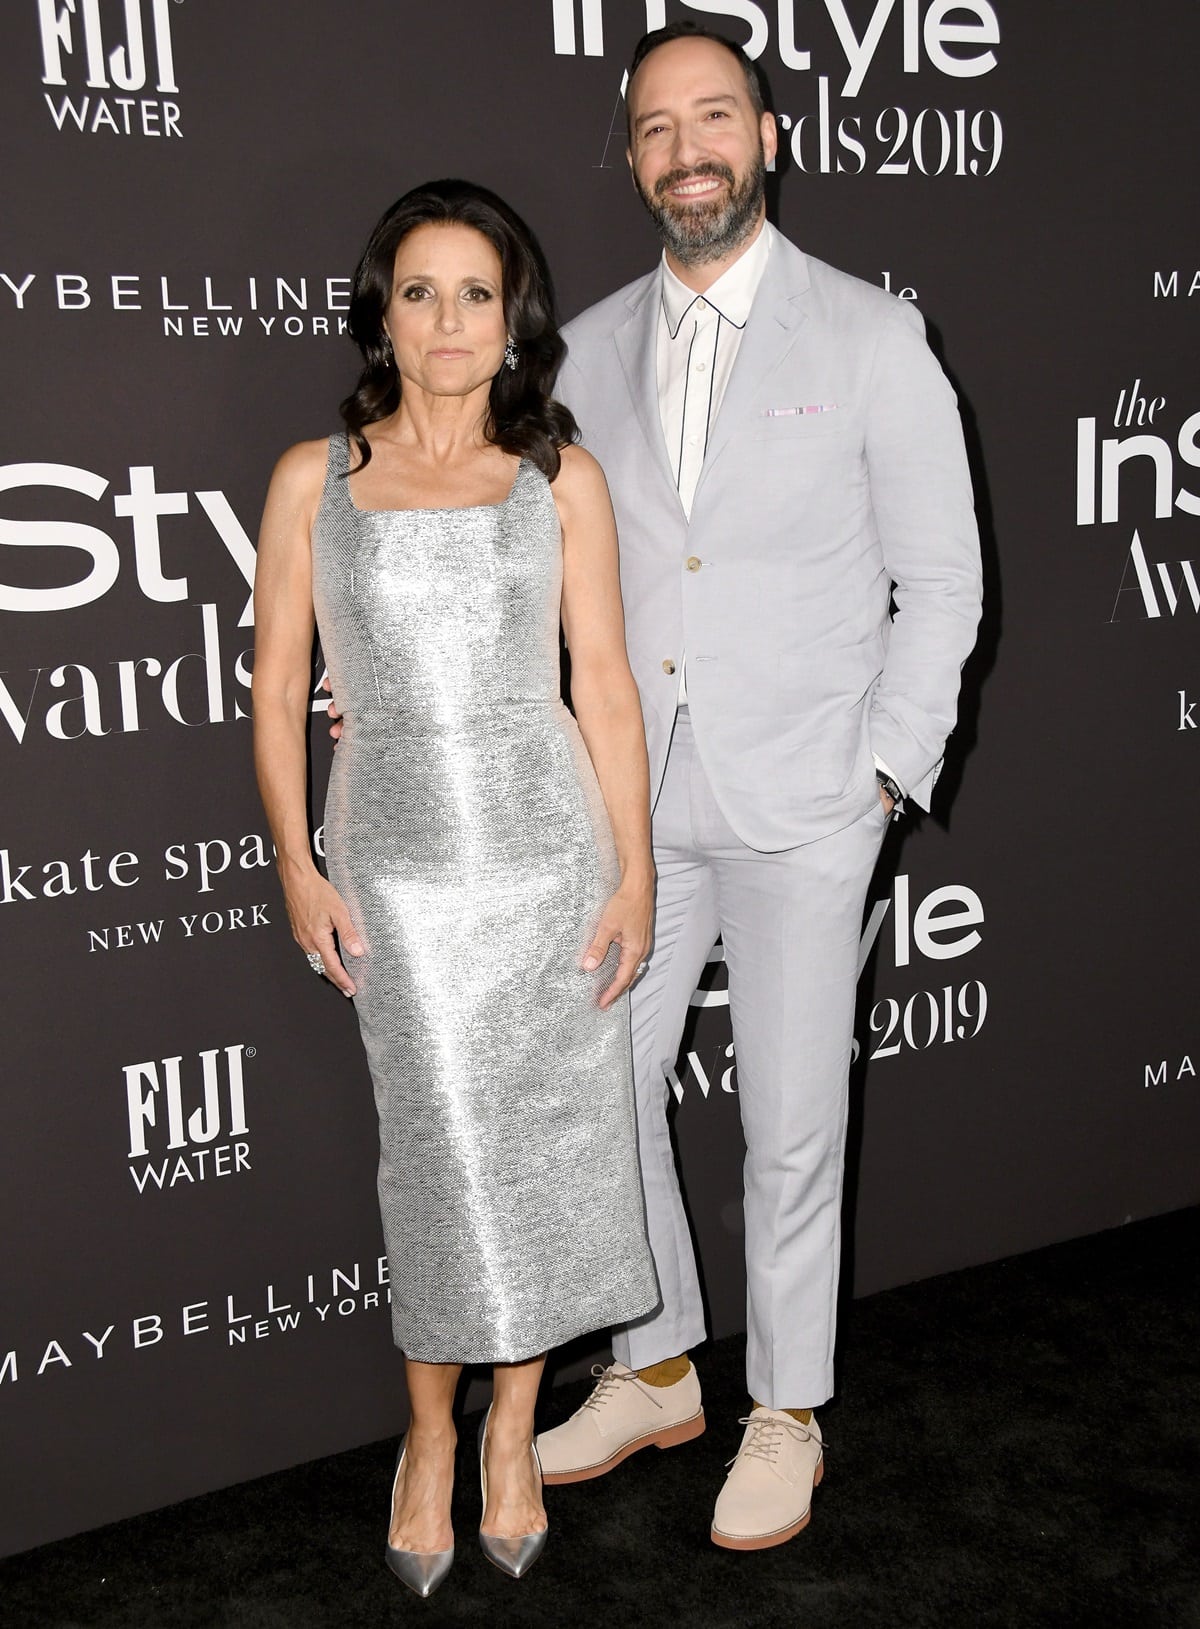 At the 2019 InStyle Awards held at The Getty Center in Los Angeles, California, Julia Louis-Dreyfus, standing at 5ft 2 ½ inches (158.8 cm), was notably shorter next to Tony Hale, who towers at 6ft ½ inch (184.2 cm)